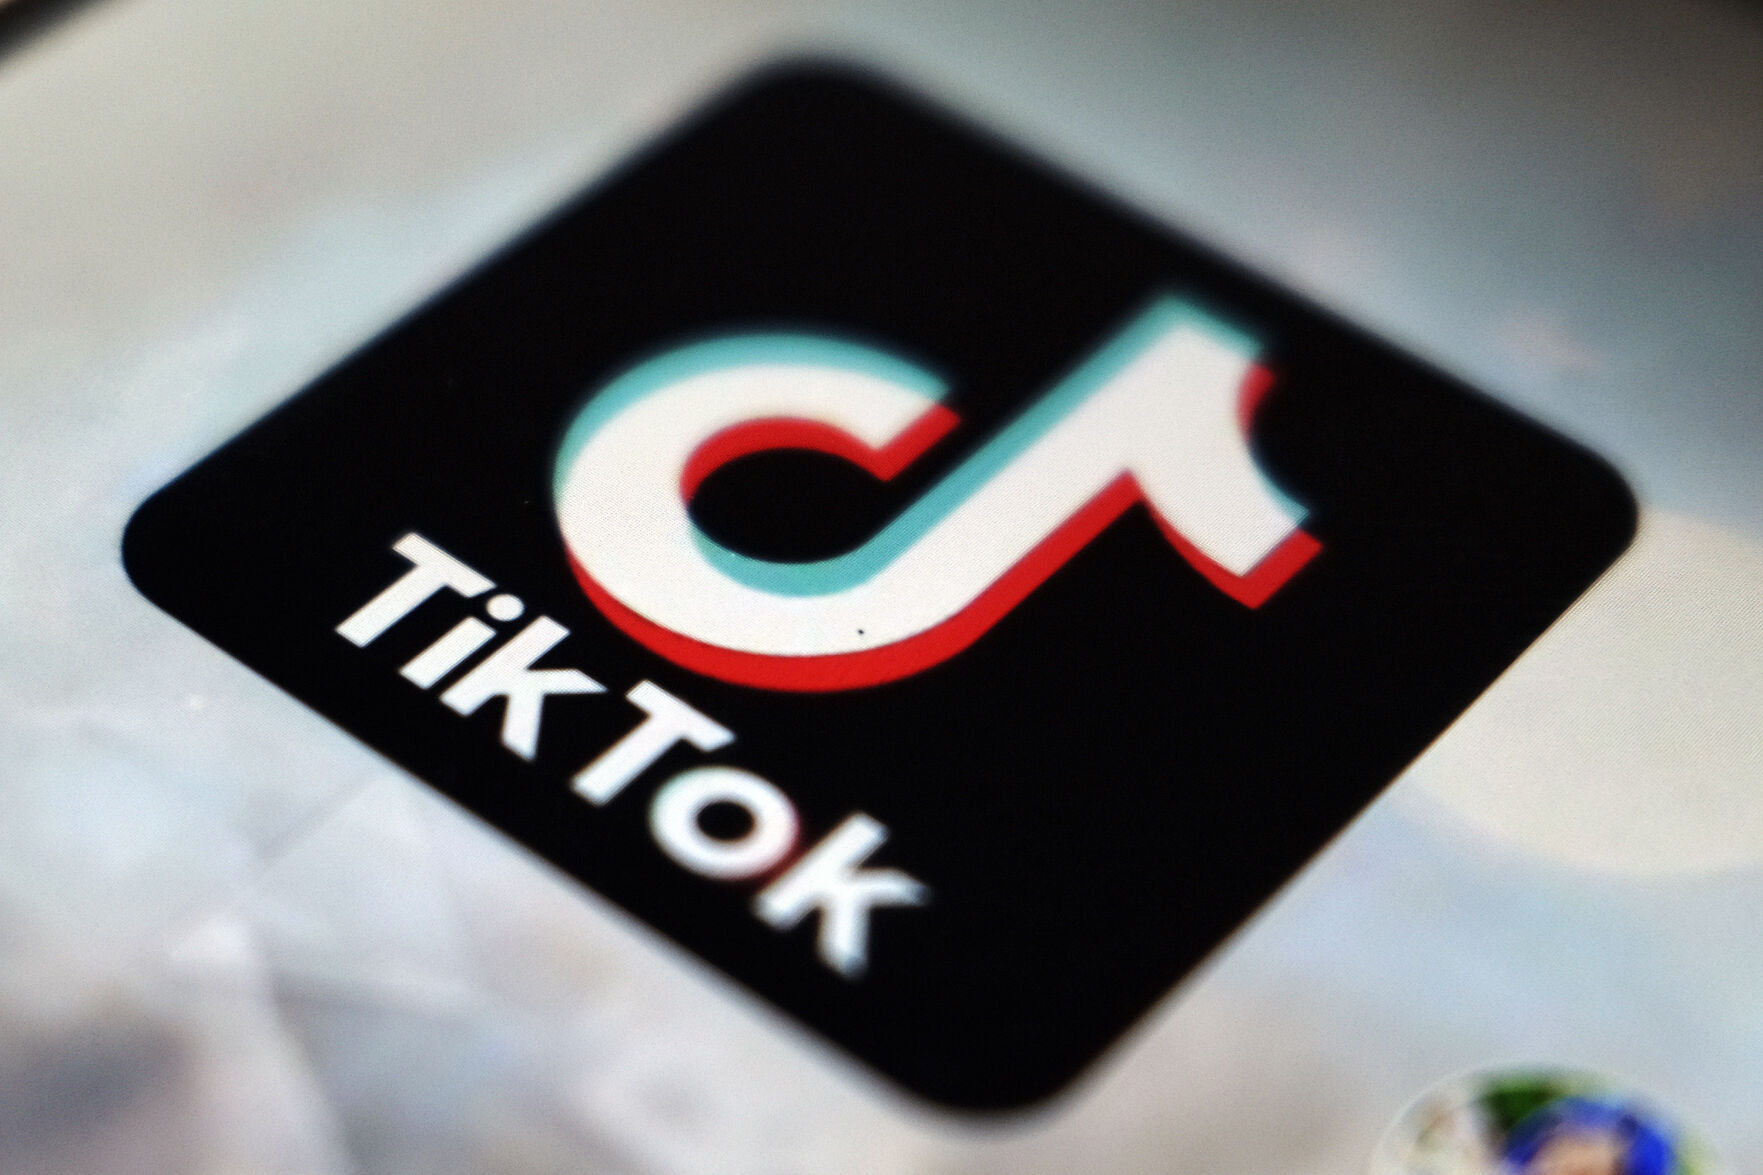 <p>FILE - The TikTok app logo appears in Tokyo on Sept. 28, 2020. U.S. government bans on Chinese-owned video sharing app TikTok reveal Washington’s own insecurities and are an abuse of state power, a Chinese Foreign Ministry spokesperson said Tuesday, Feb. 28, 2023.(AP Photo/Kiichiro Sato, File)</p>   PHOTO CREDIT: Kiichiro Sato 